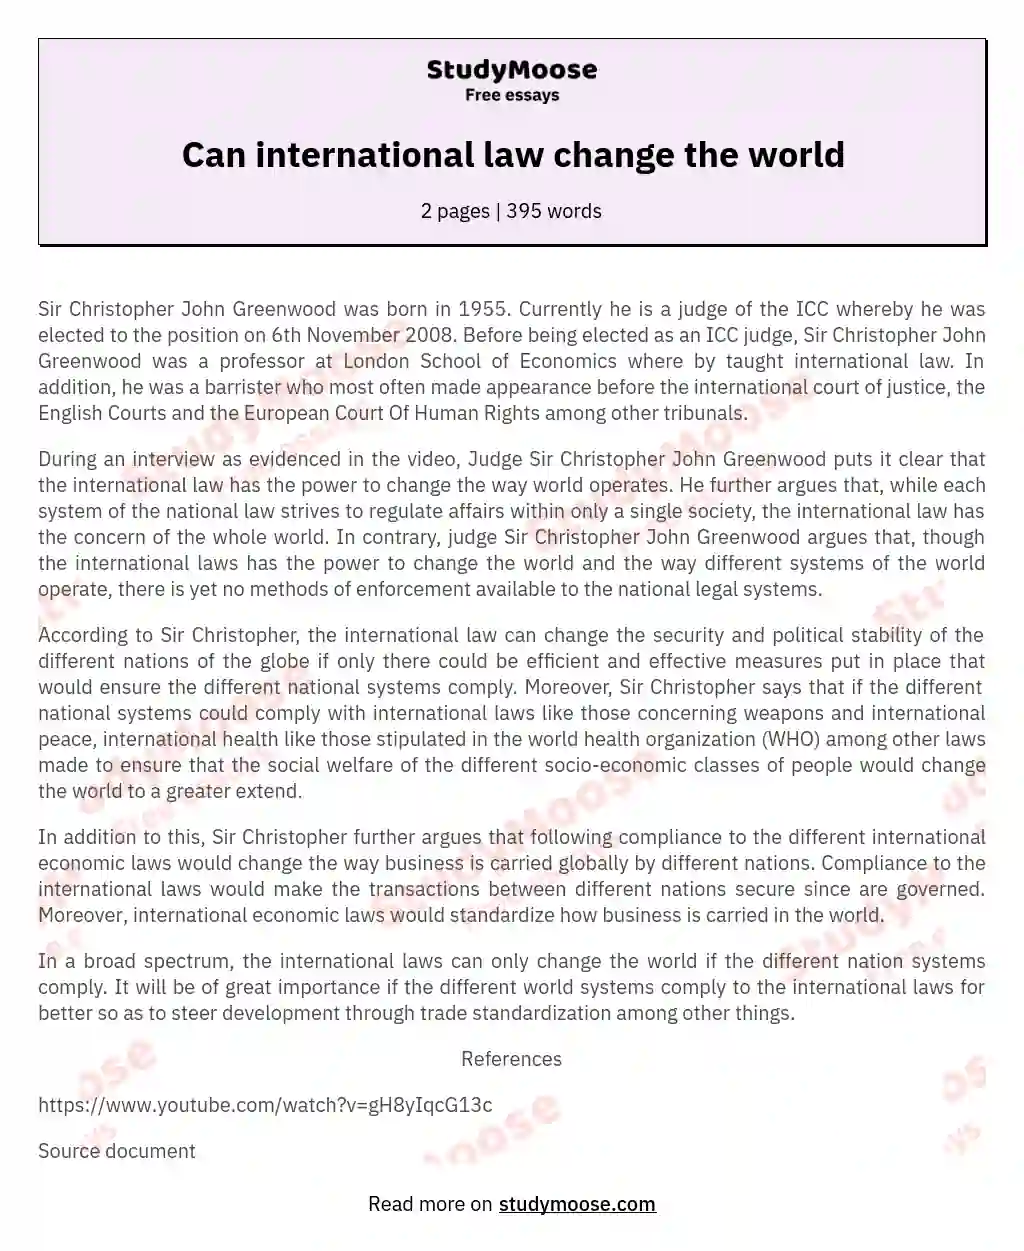 Can international law change the world